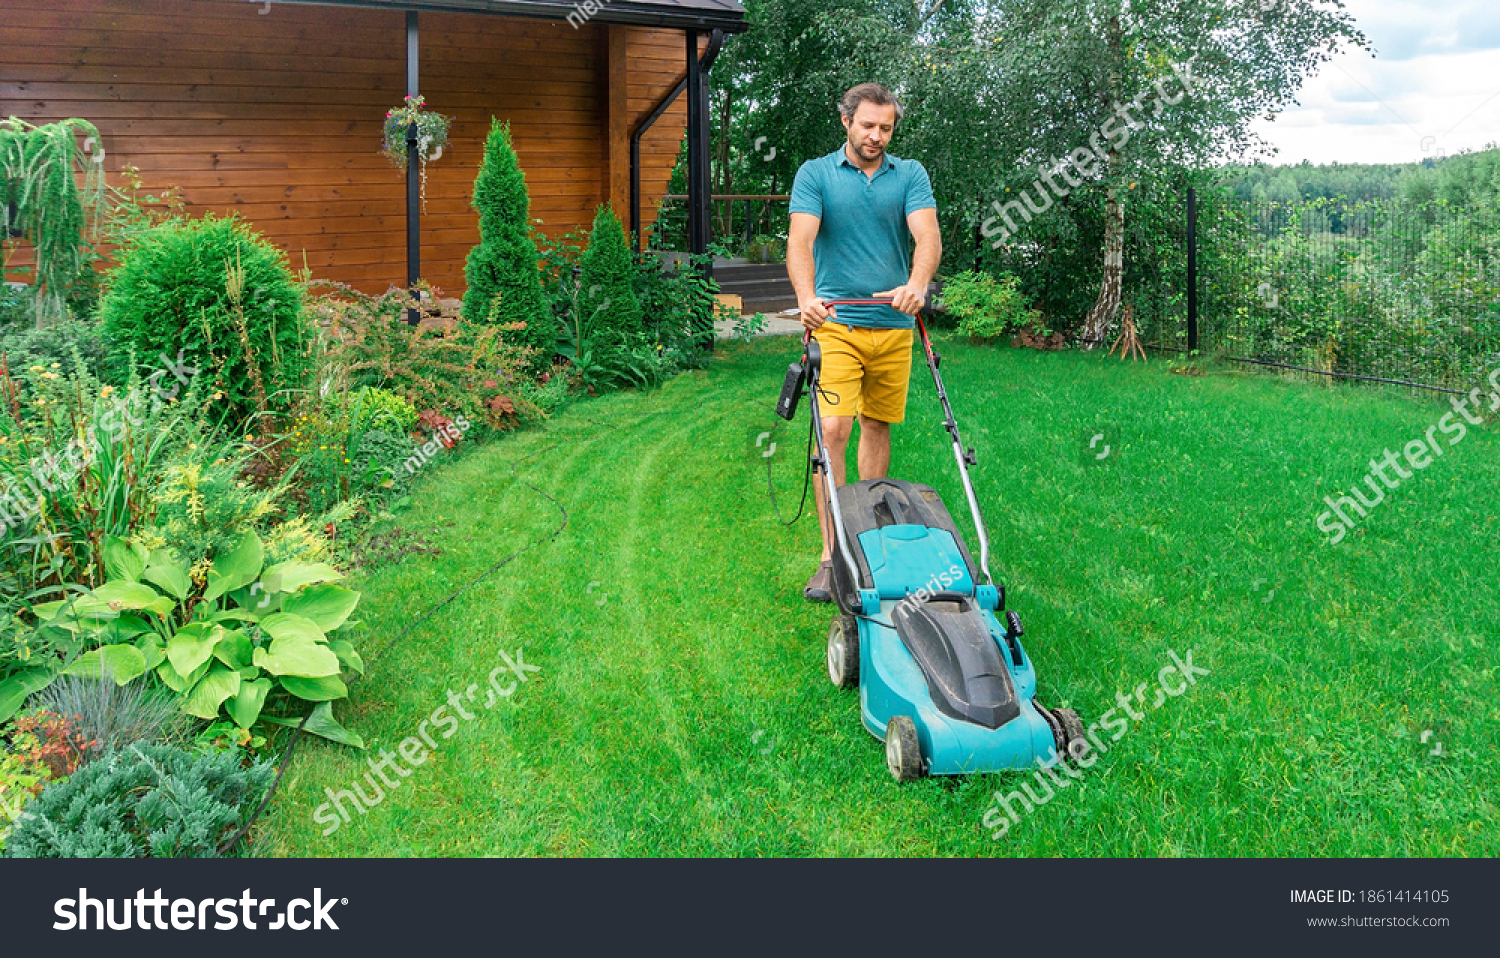 Lawn care. Mowing grass with an electric lawn mower. A young man mows the grass with a lawn mower with a grass collector on a sunny summer day. Beautiful landscape design in the garden. #1861414105